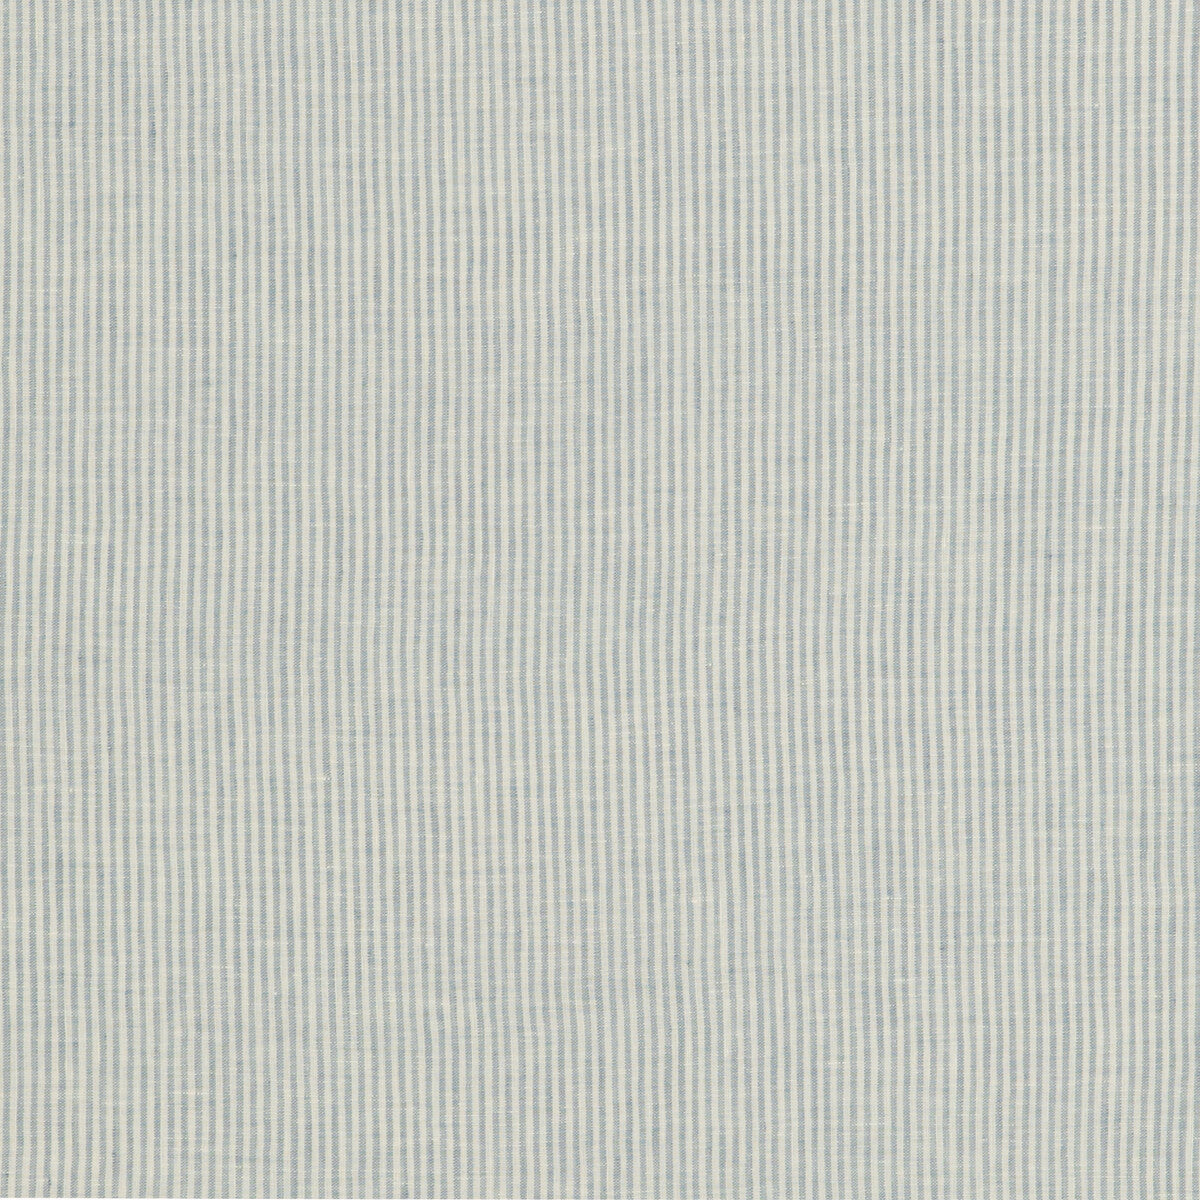 Nala Ticking fabric in sky color - pattern ED85331.602.0 - by Threads in the Nala Linens collection